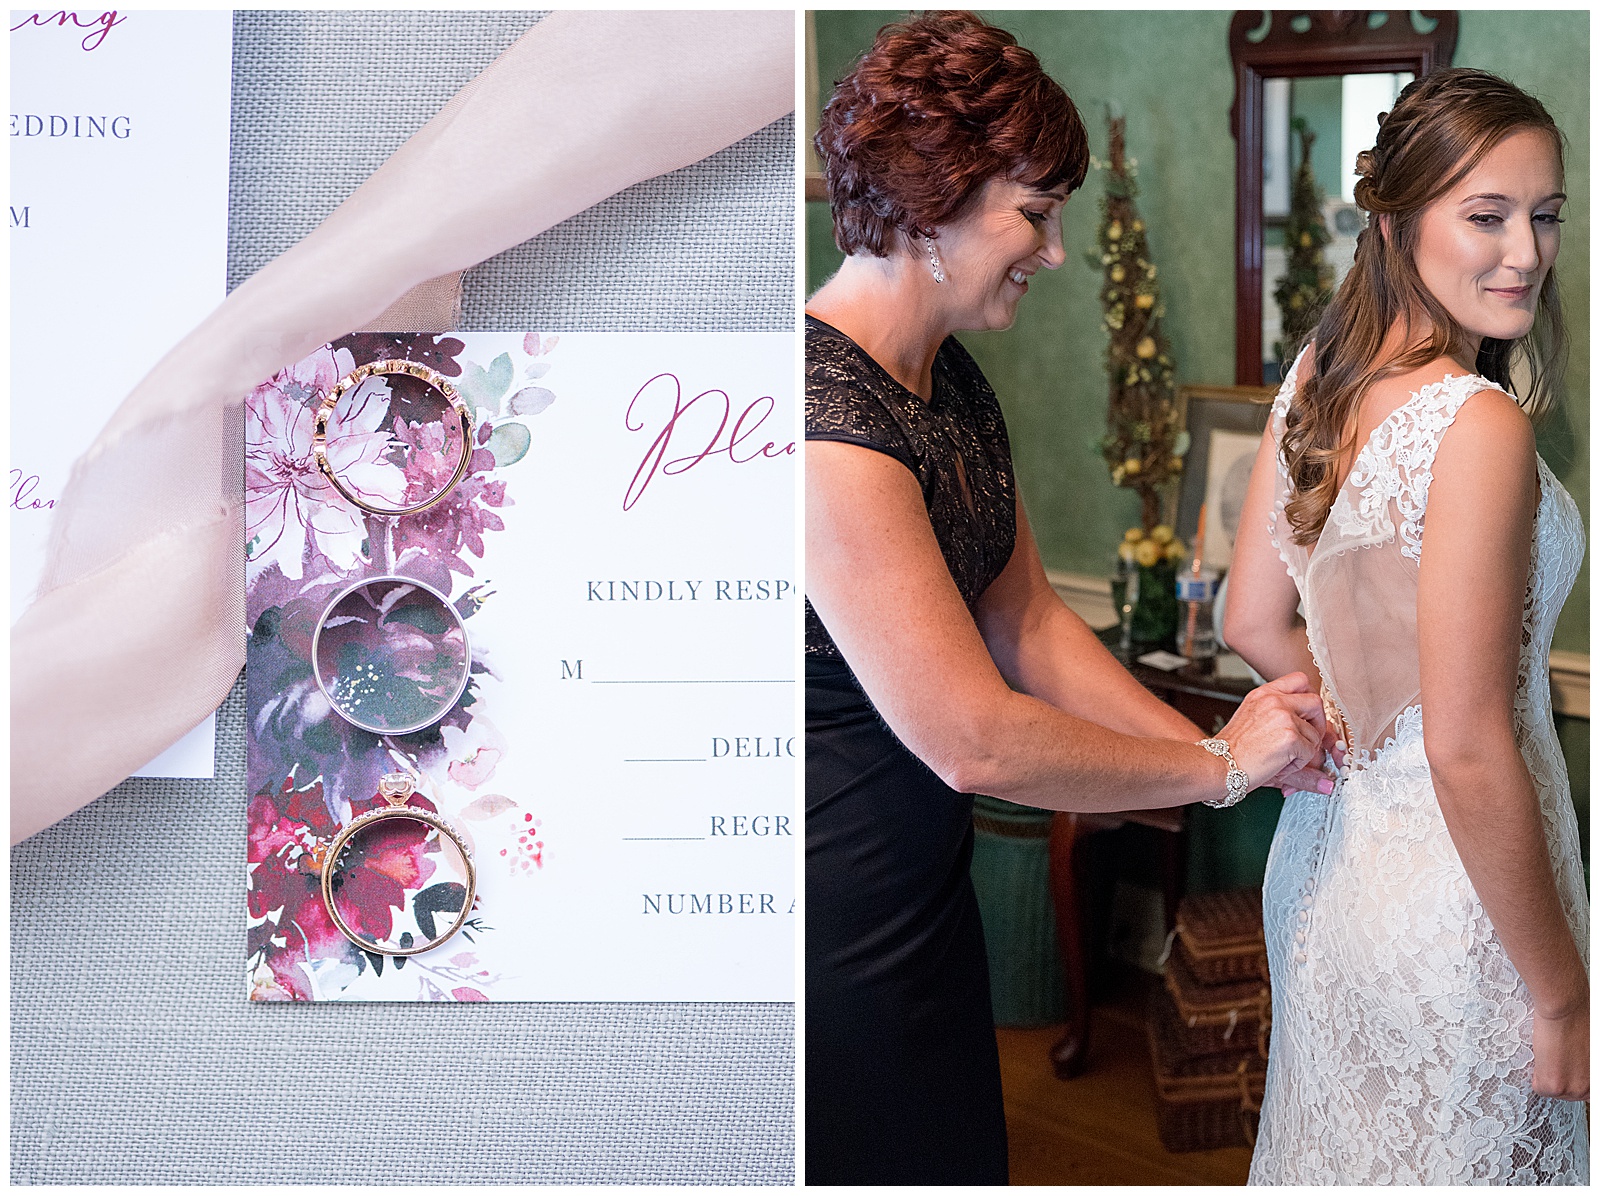 mother of bride buttoning up brides dress